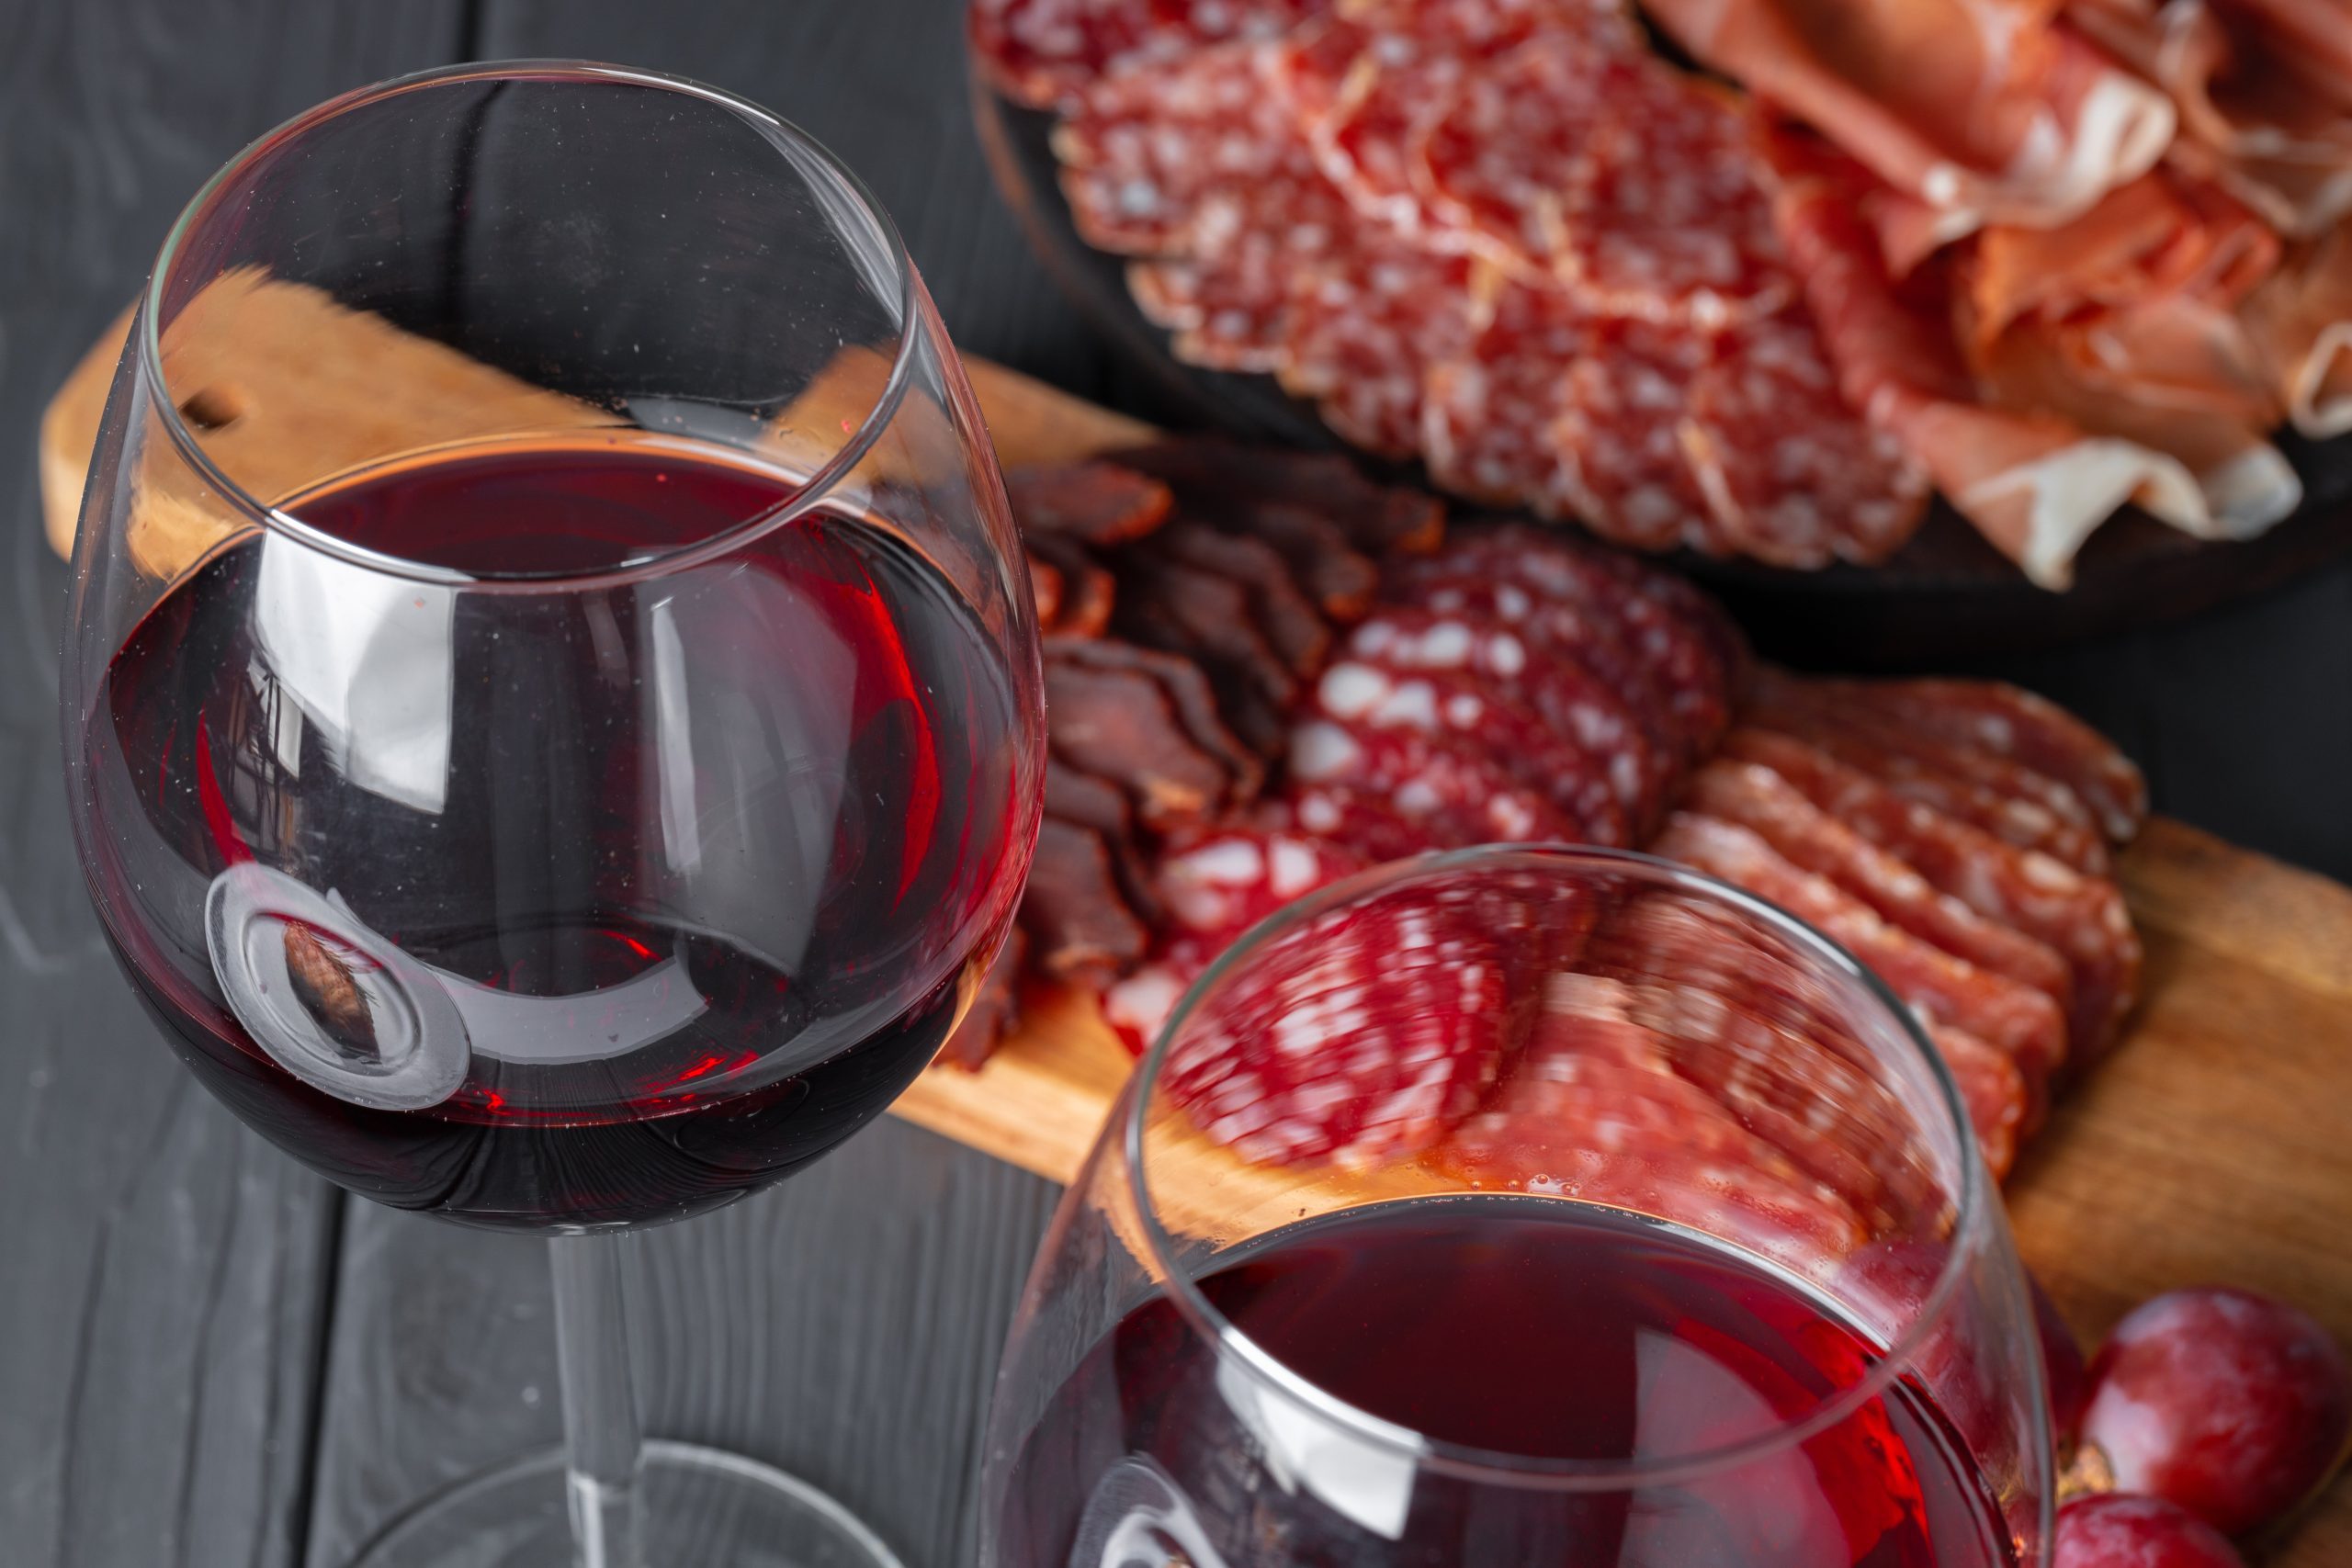 Wineglass with red wine and meat cuts board